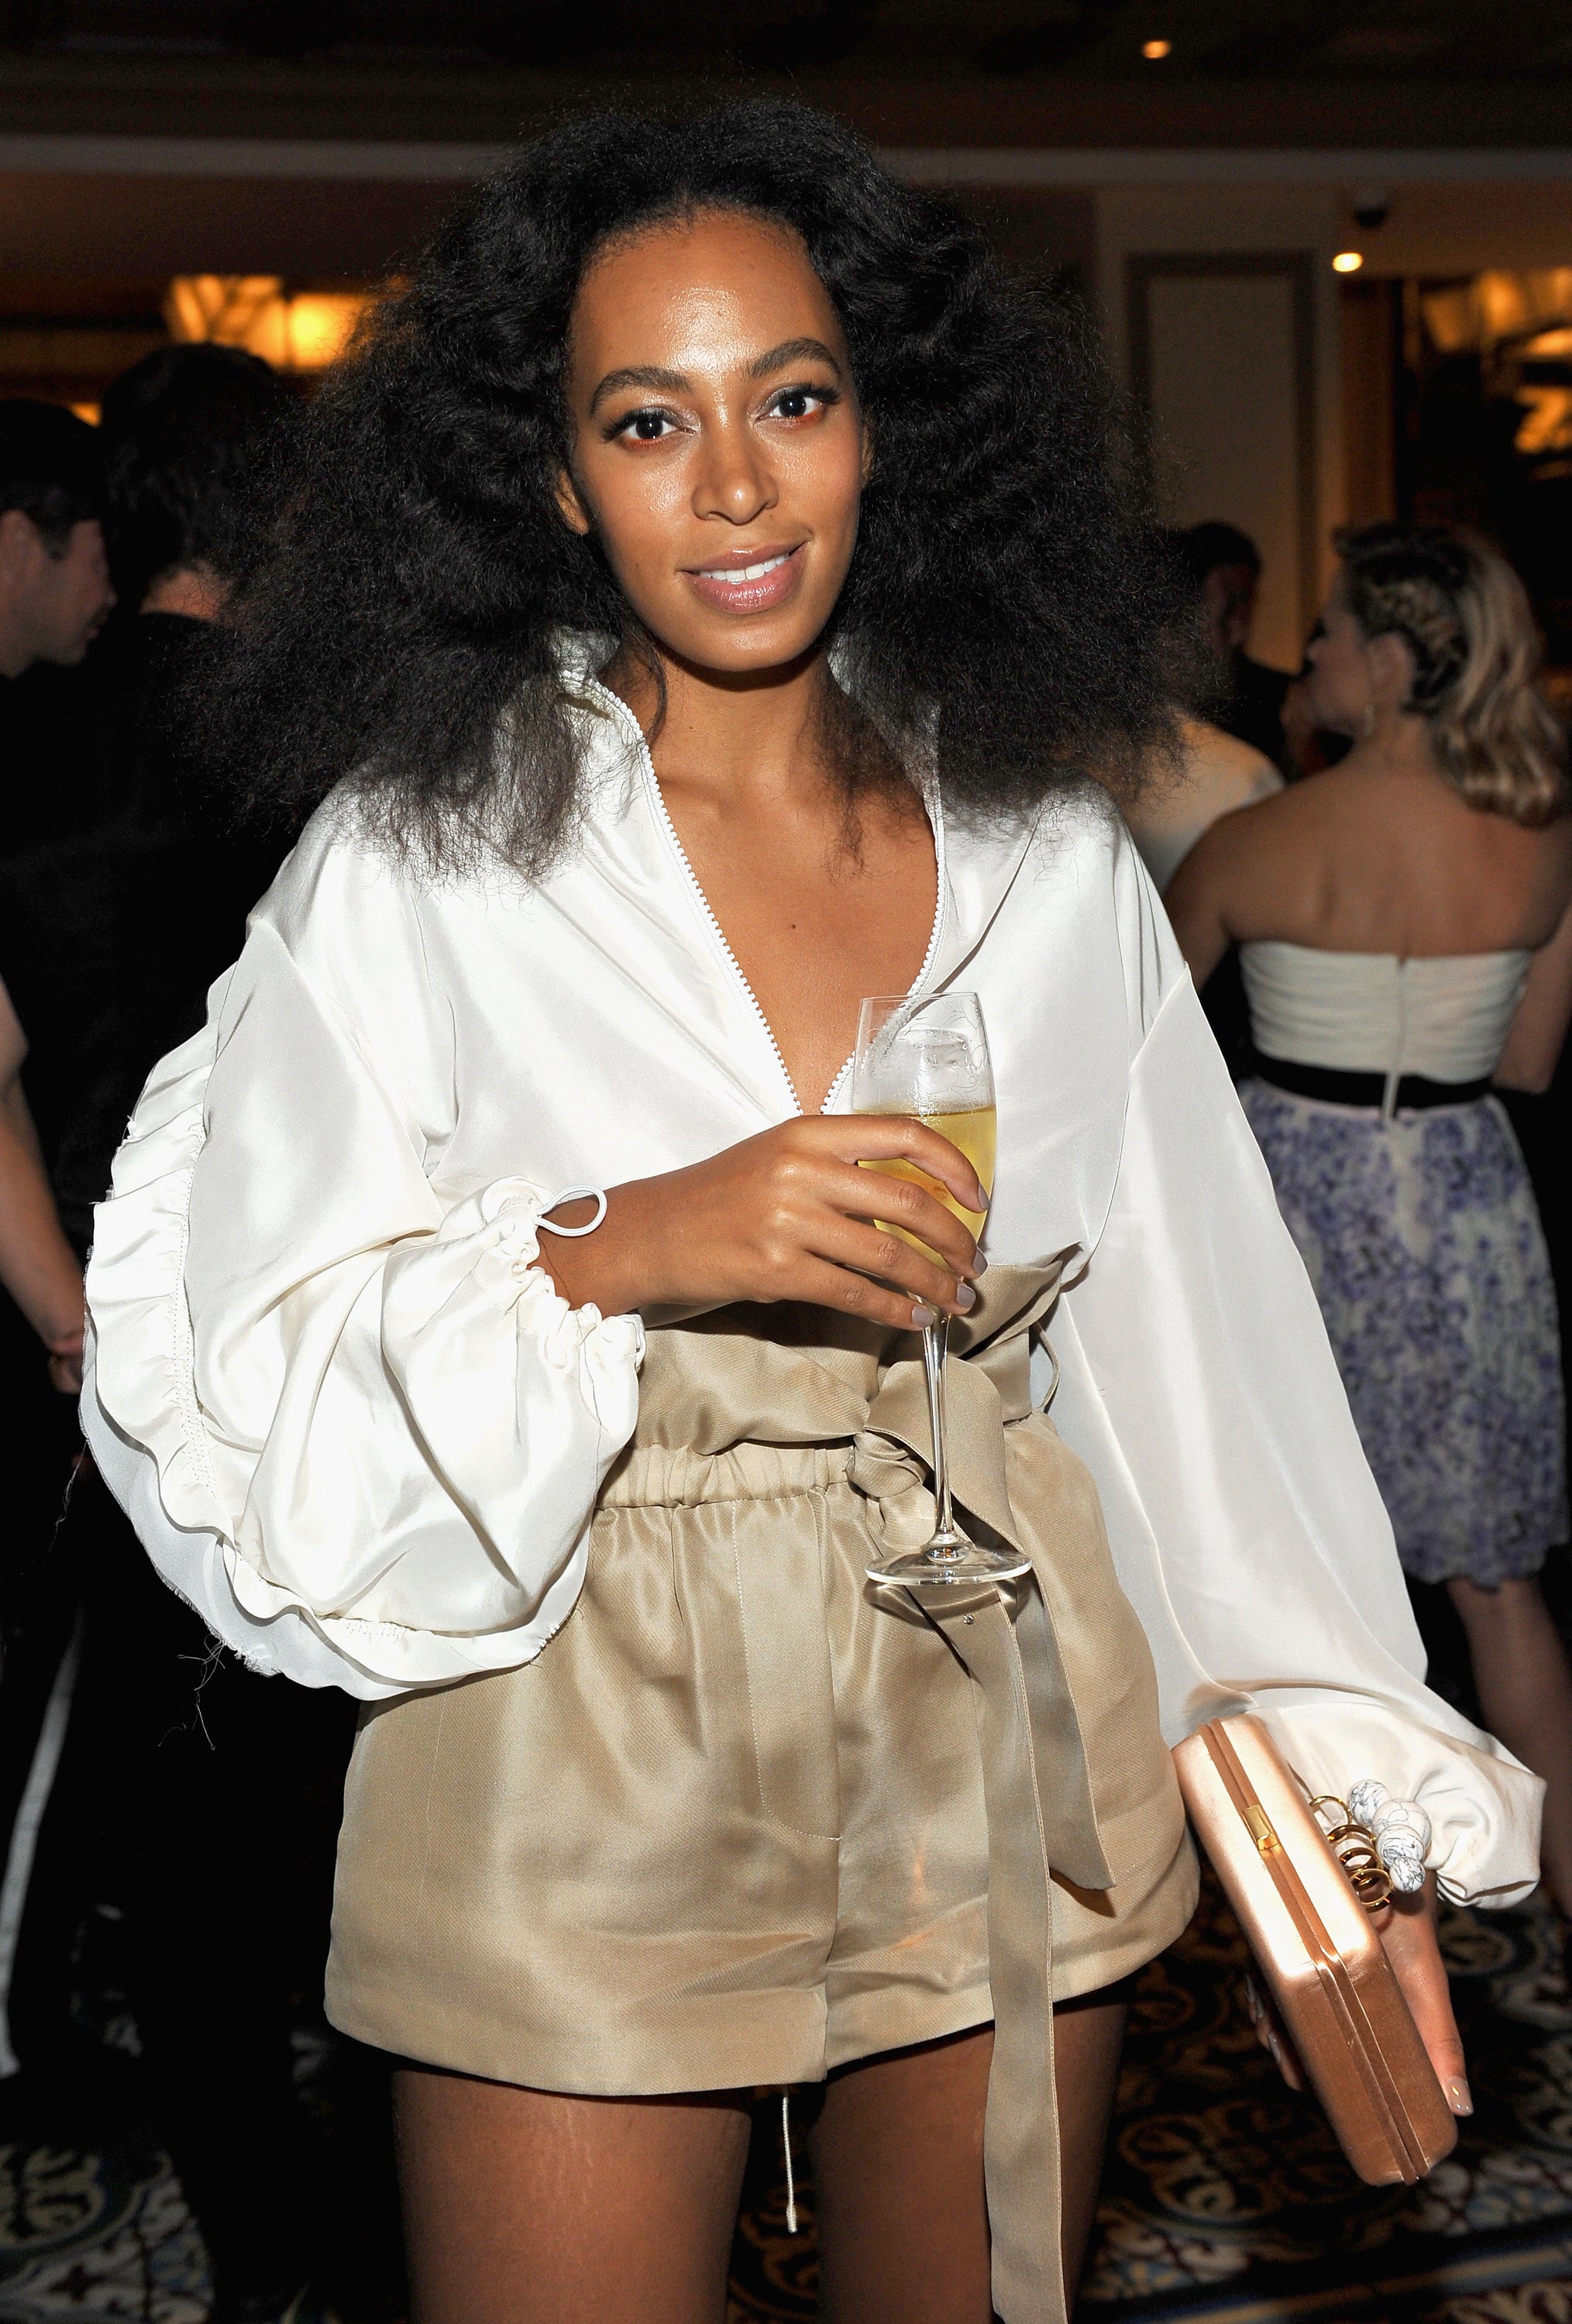 Beauty Looks From The CFDA/Vogue Fashion Fund Awards Dinner